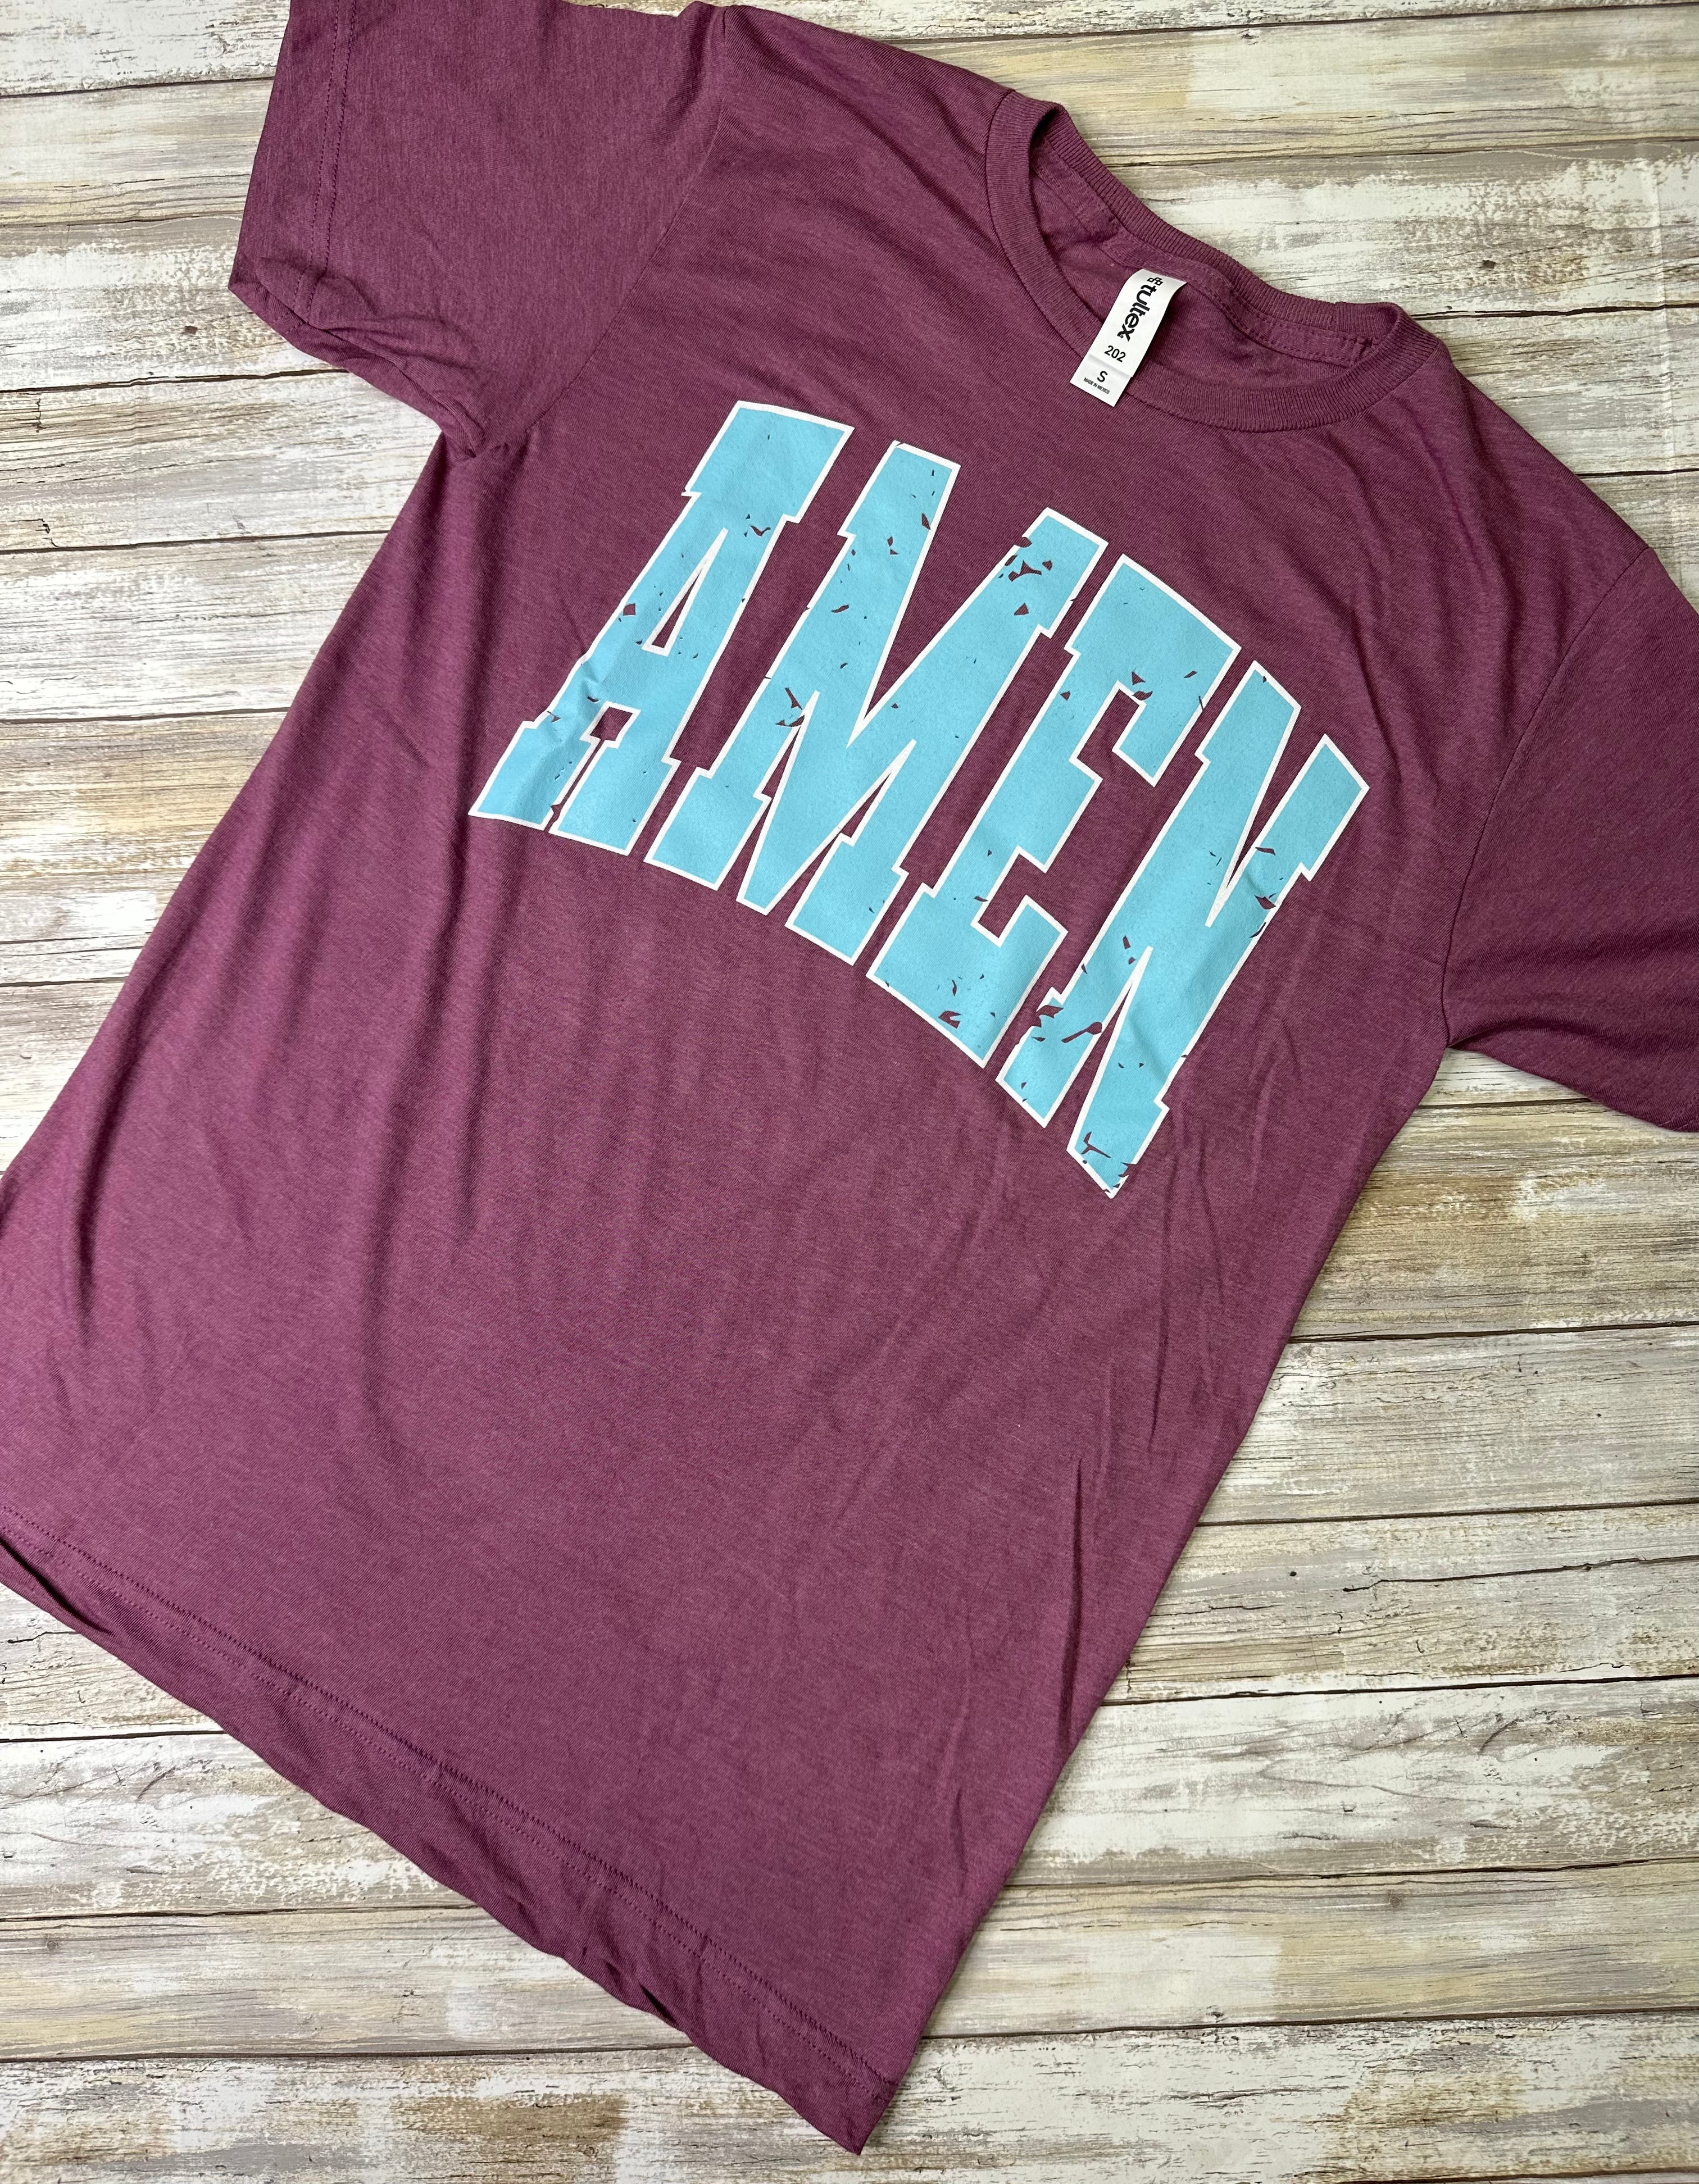 Amen Burgundy and Teal Graphic Tee